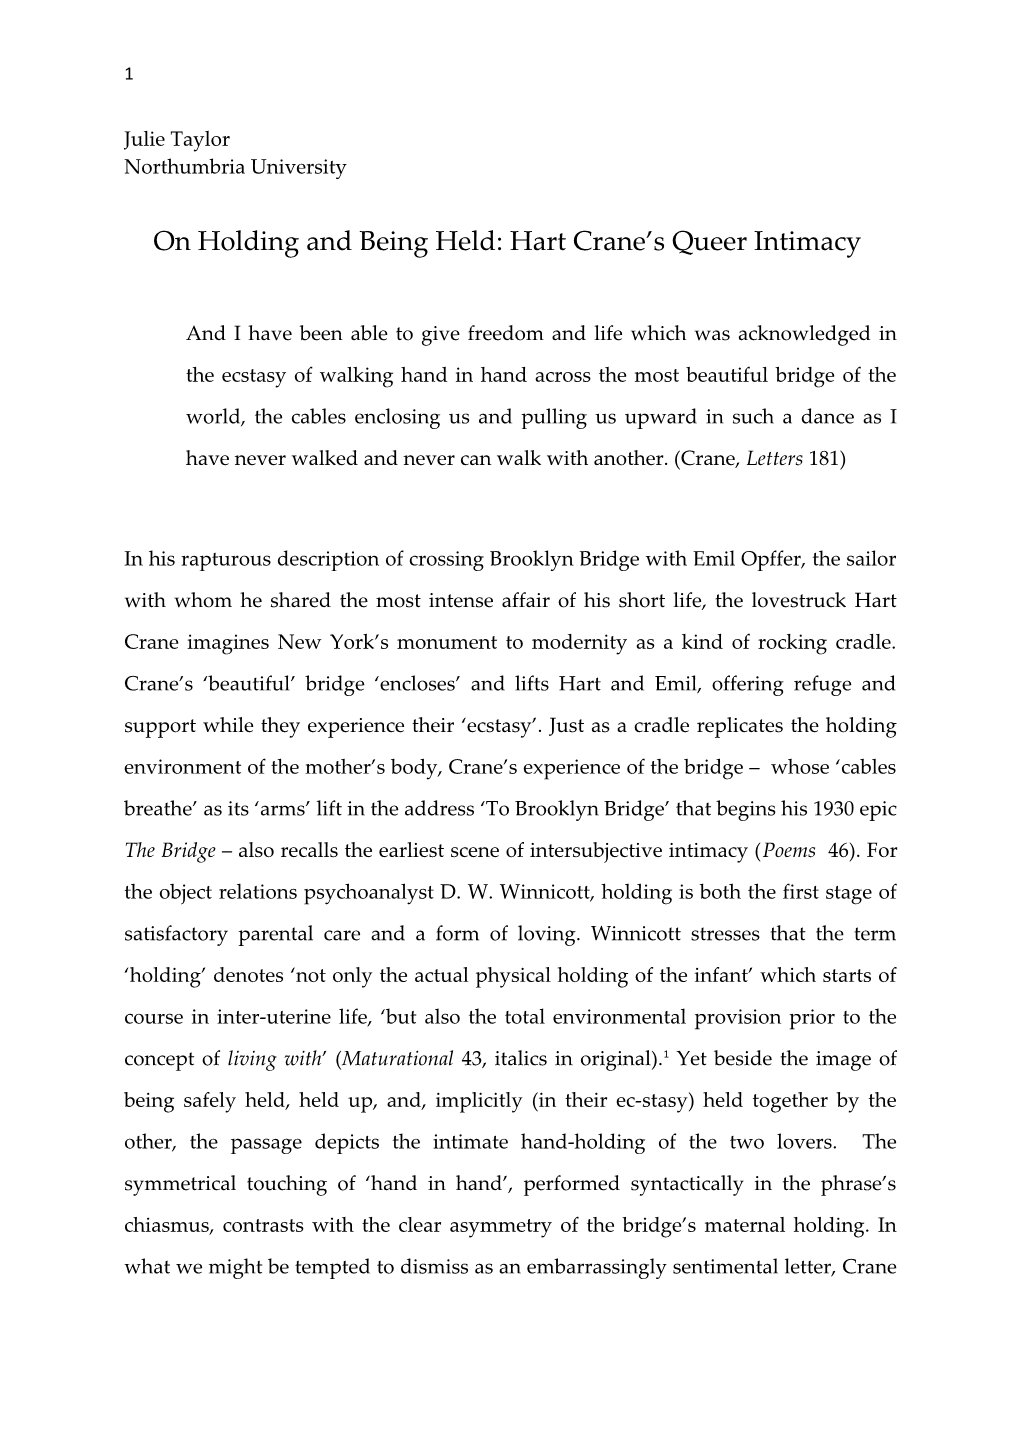 On Holding and Being Held: Hart Crane S Queer Intimacy